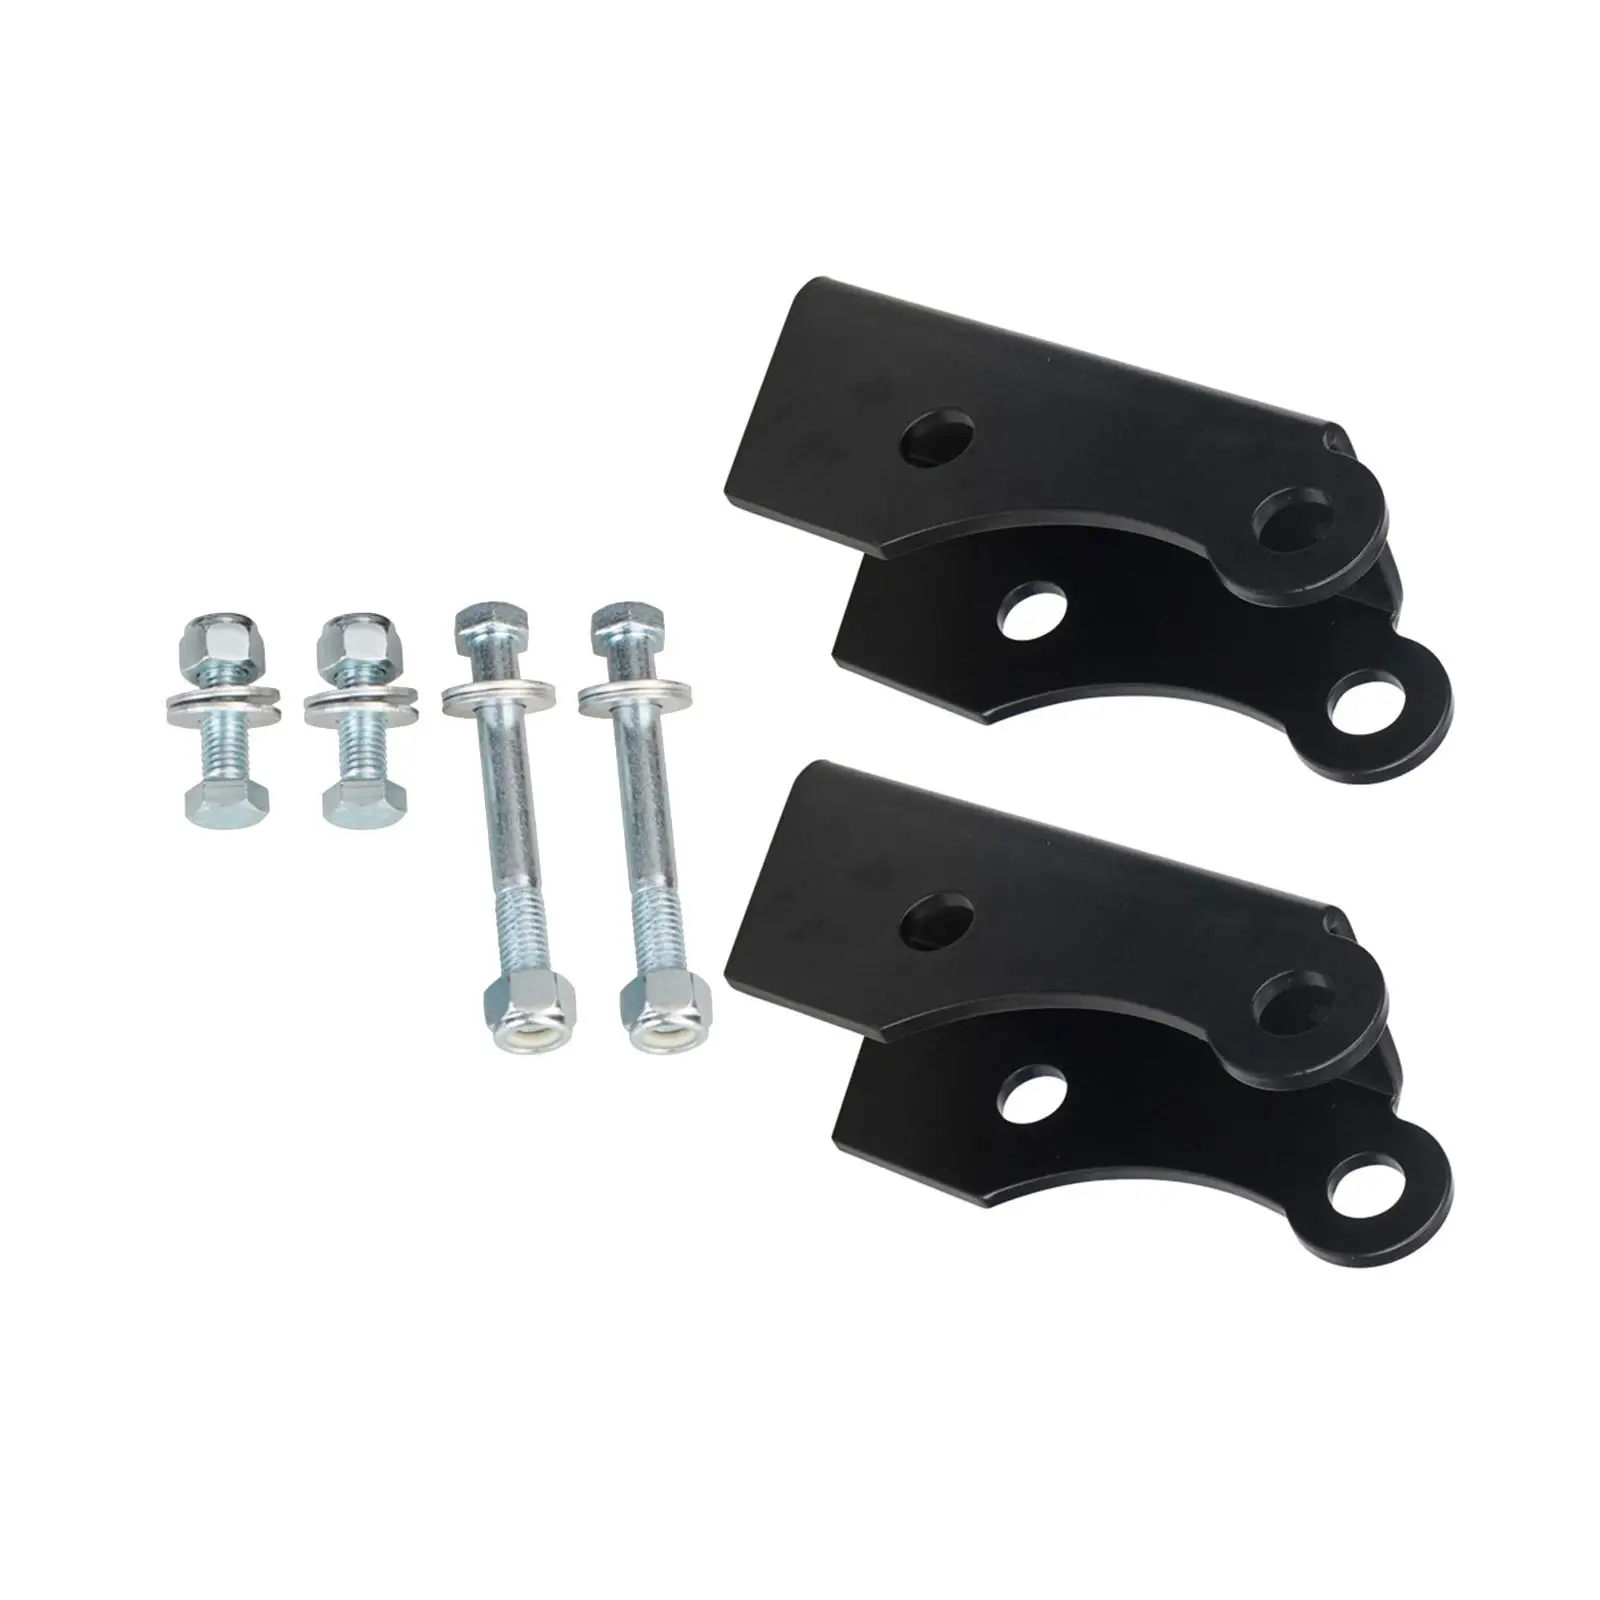 2Pcs Shocks Drop Lowering Extension Brackets Accessories Mounting Hardware High Quality Replace for Chevrolet Silverado C10